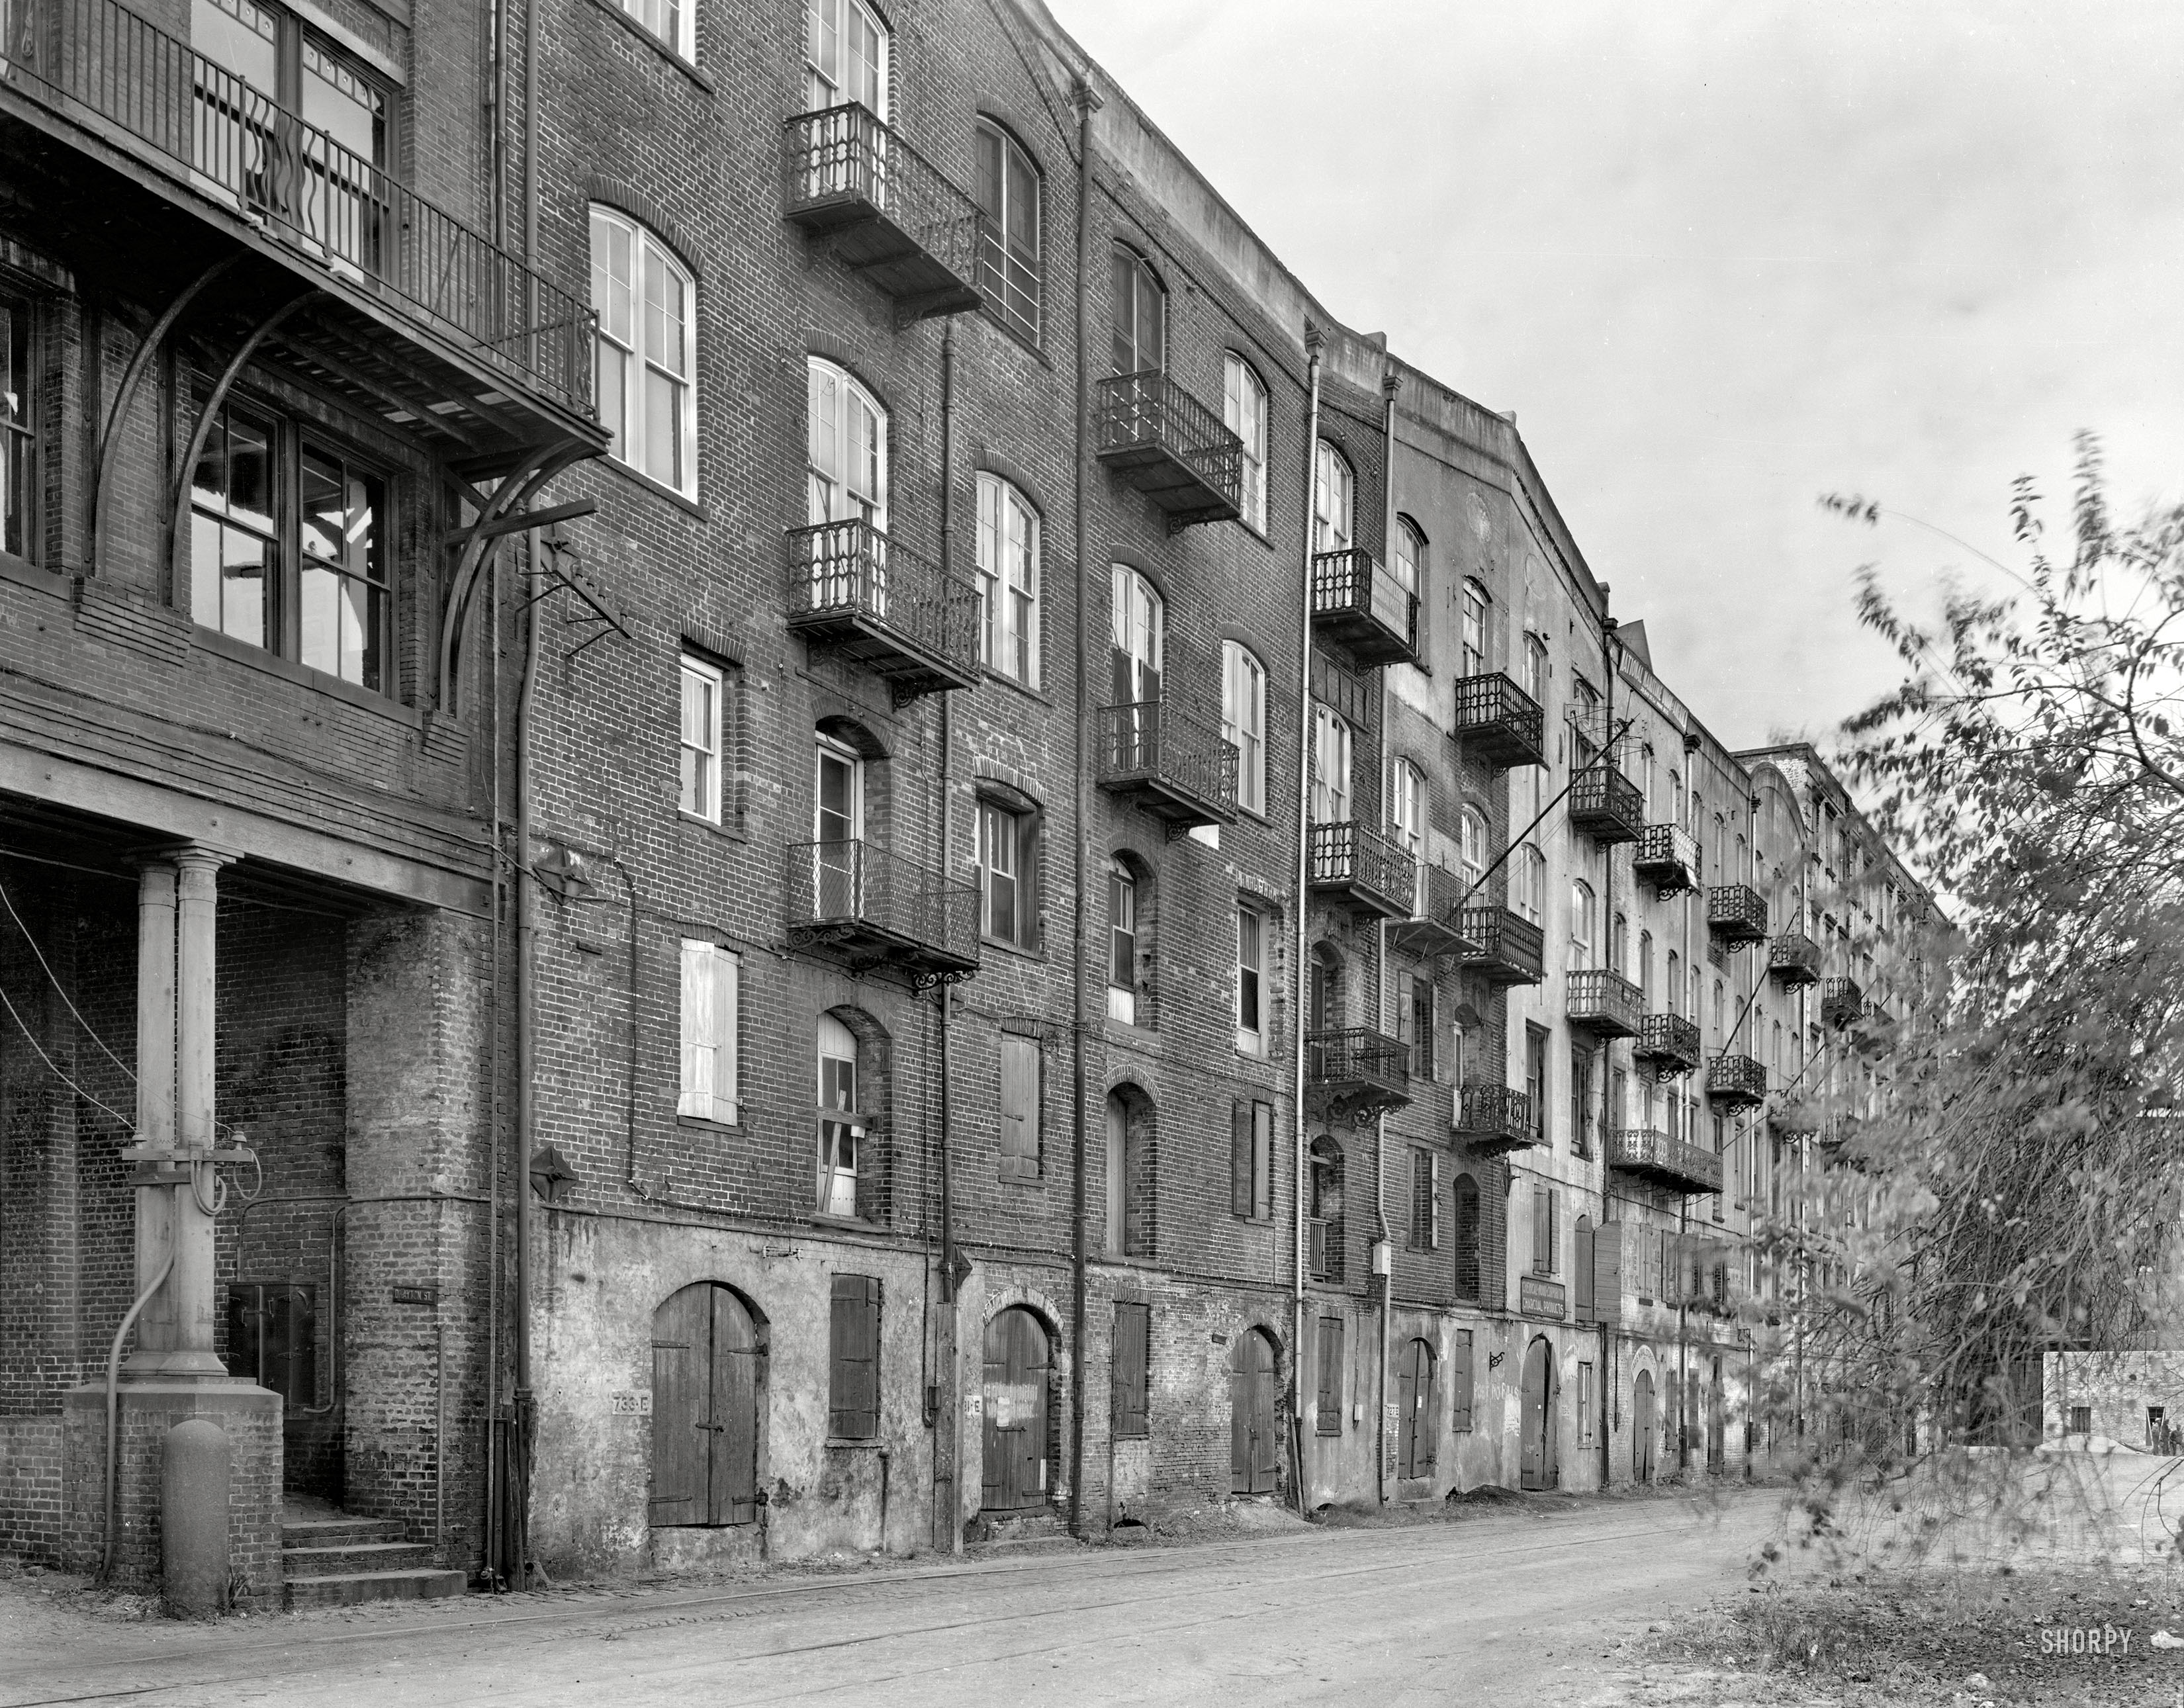 1937. "Stoddard's Lower Range from Factors Walk, River Street, Savannah, Georgia." Cotton warehouses built by John Stoddard on the bluffs above the Savannah River in the late 1850s. This seems ripe for one of those condo conversions where the price features a decimal point. View full size.